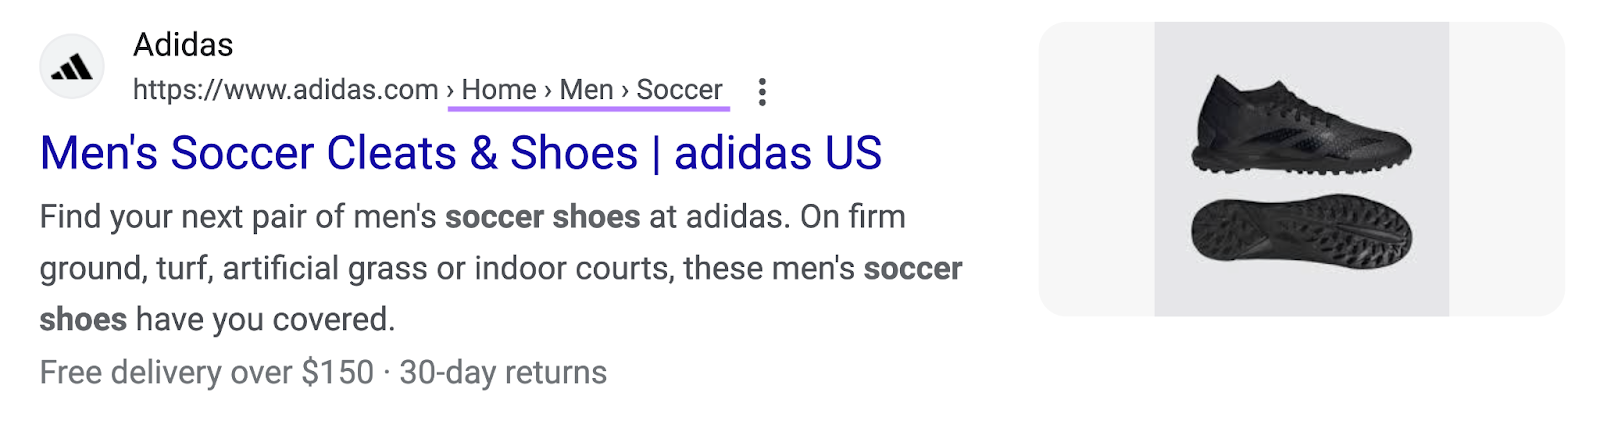 Adidas page with breadcrumbs for SEO in SERP